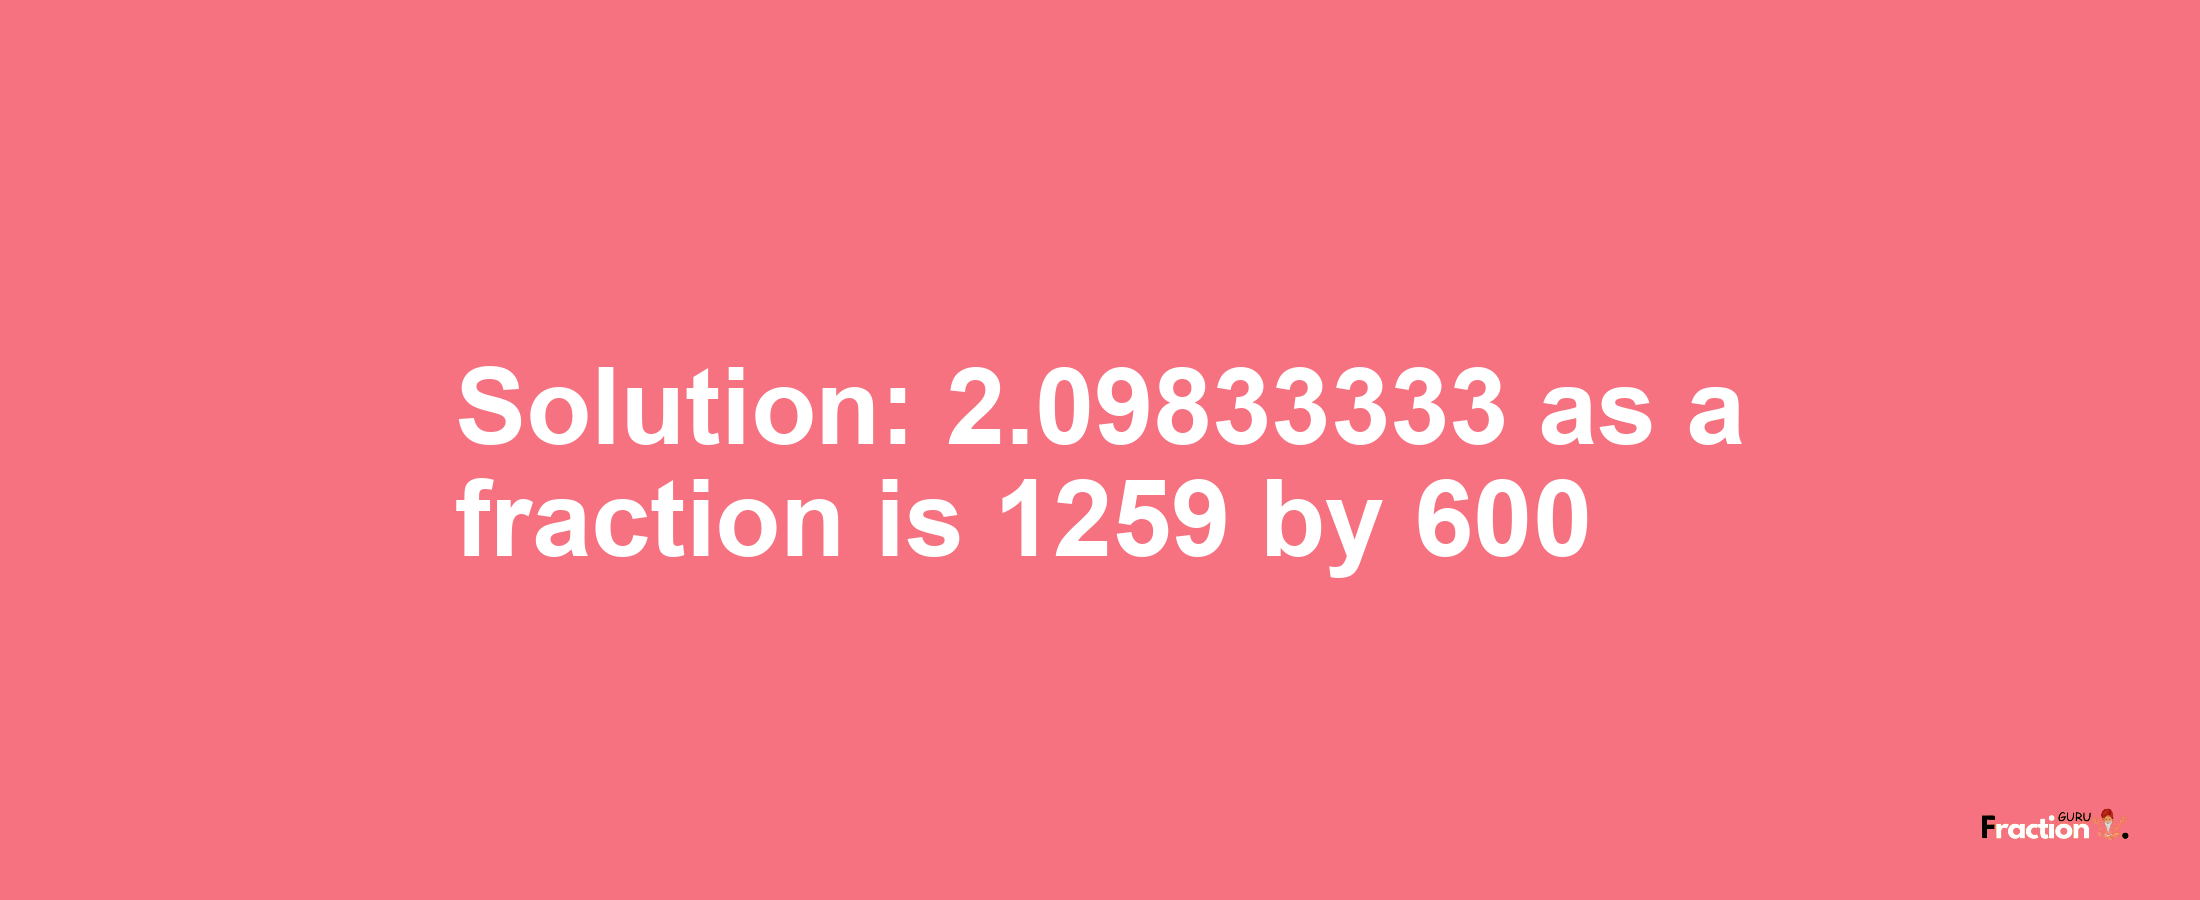 Solution:2.09833333 as a fraction is 1259/600